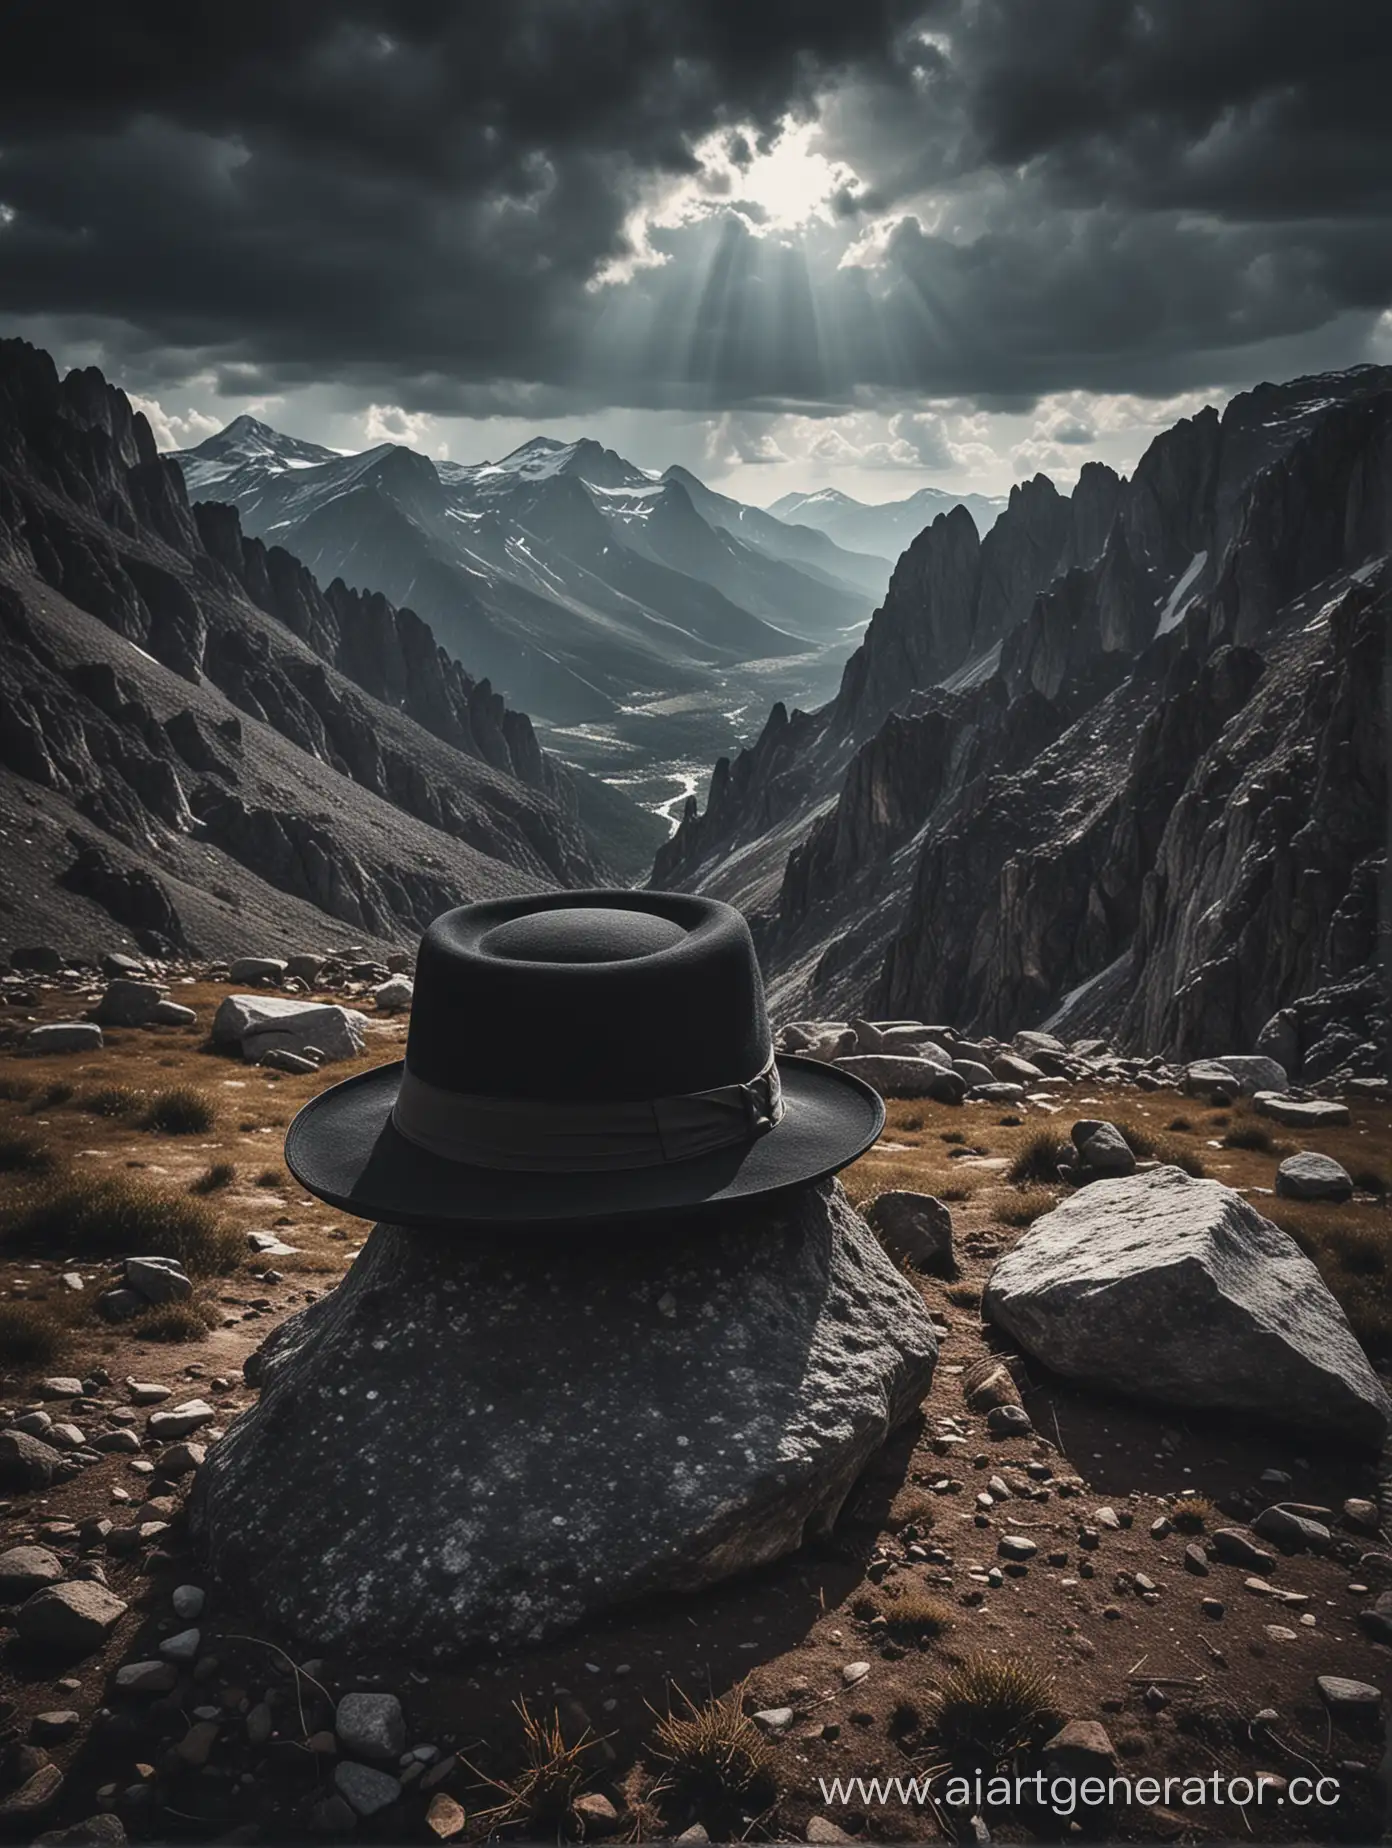 Spirit-of-the-Vagabond-Black-Hat-Amidst-Falling-Stones-and-Majestic-Mountains